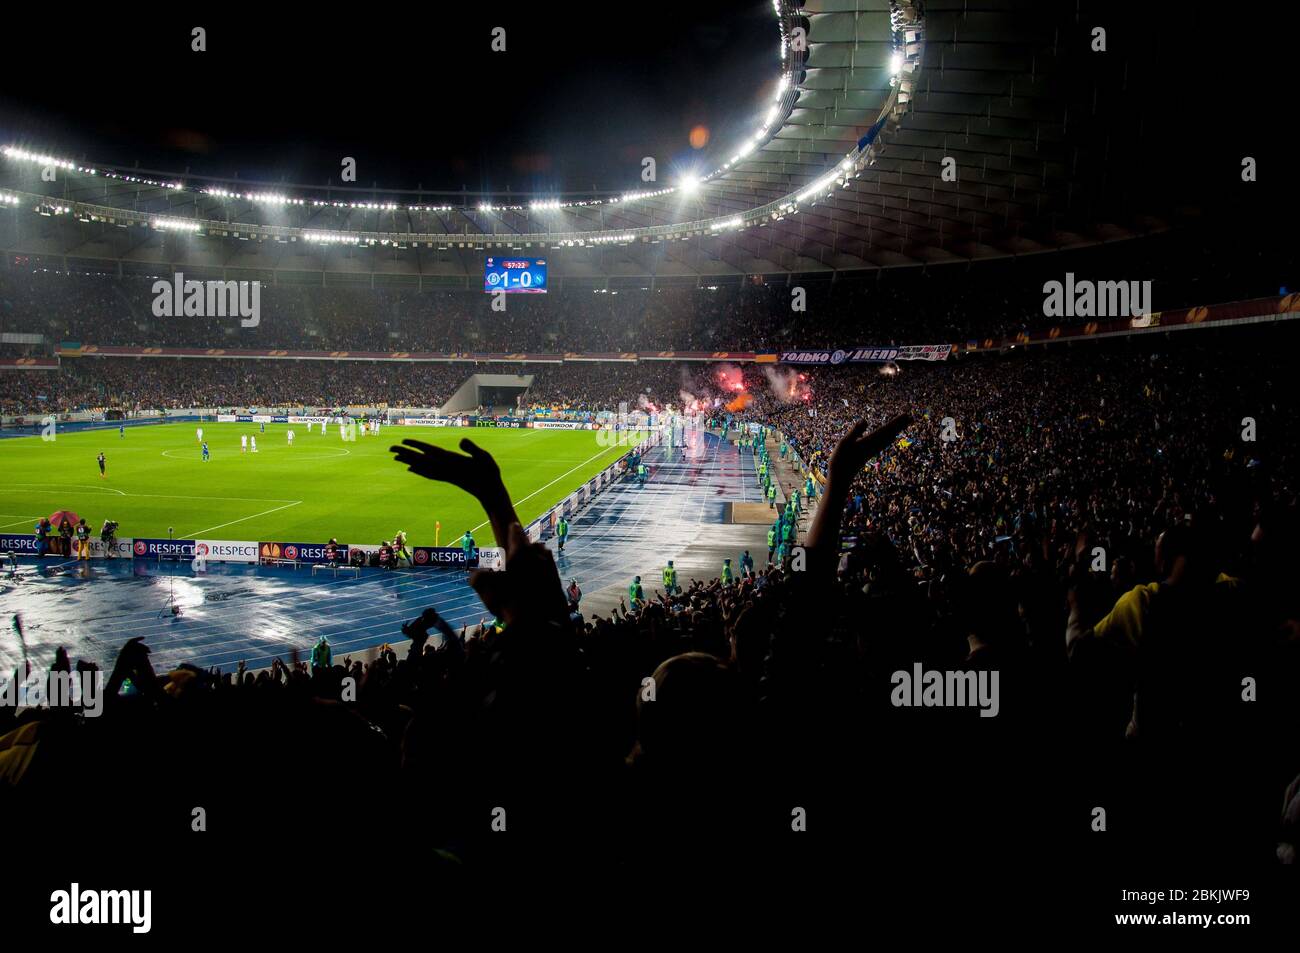 KYIV, UKRAINE - MAY 14, 2015 Football club supporter clapping during UEFA Europa League semifinal game between FC Dnipro and FC Napoli  Stock Photo